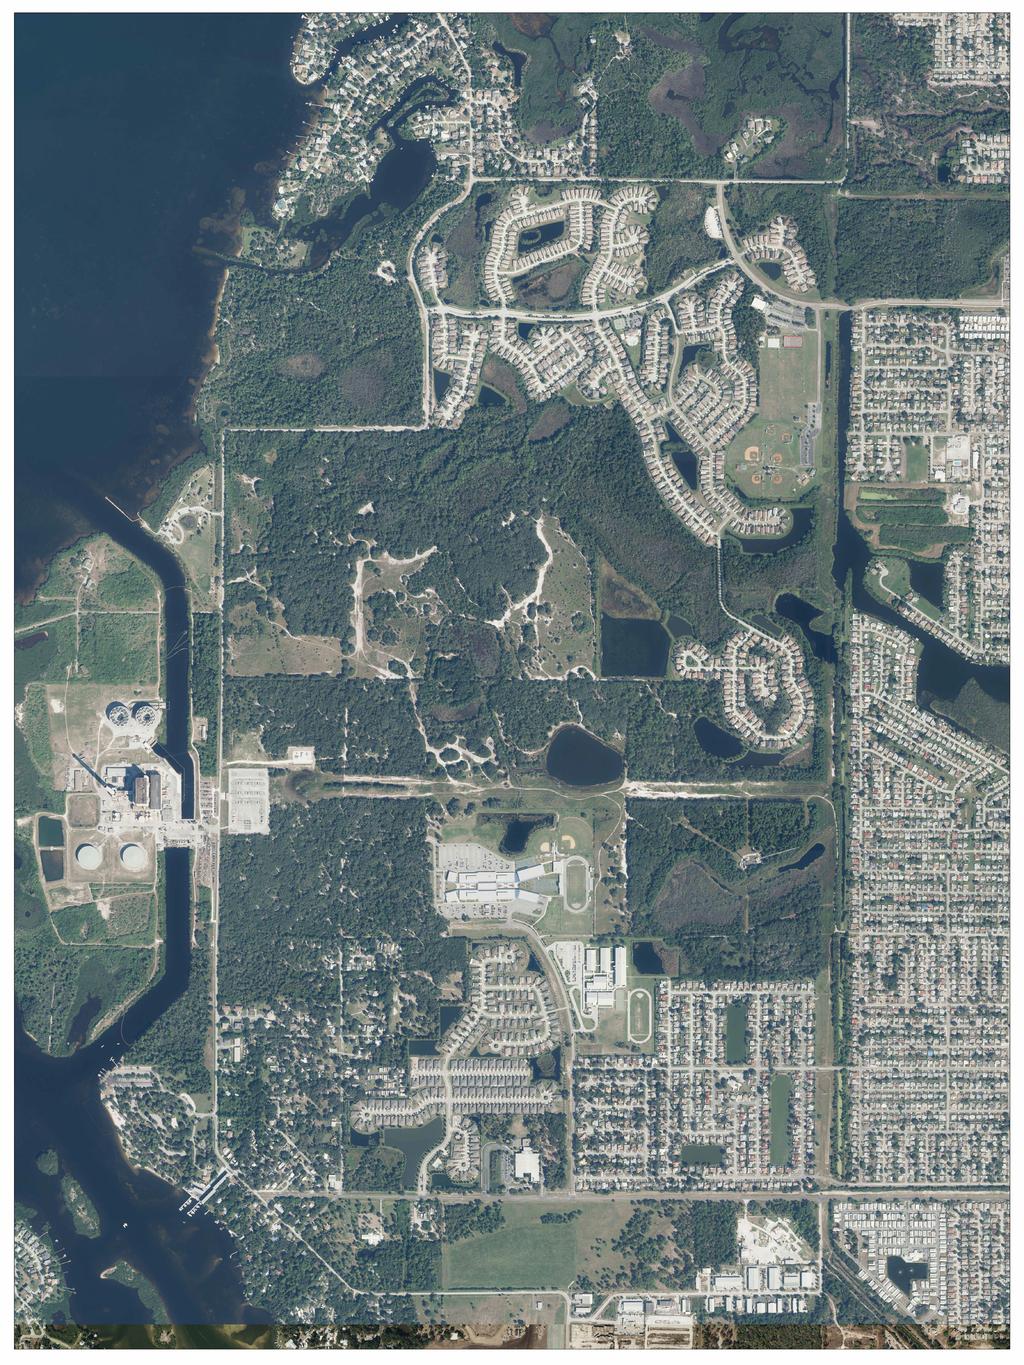 INTRODUCTION URS was retained by the Metropolitan Planning Organization (MPO) of Pasco County in the